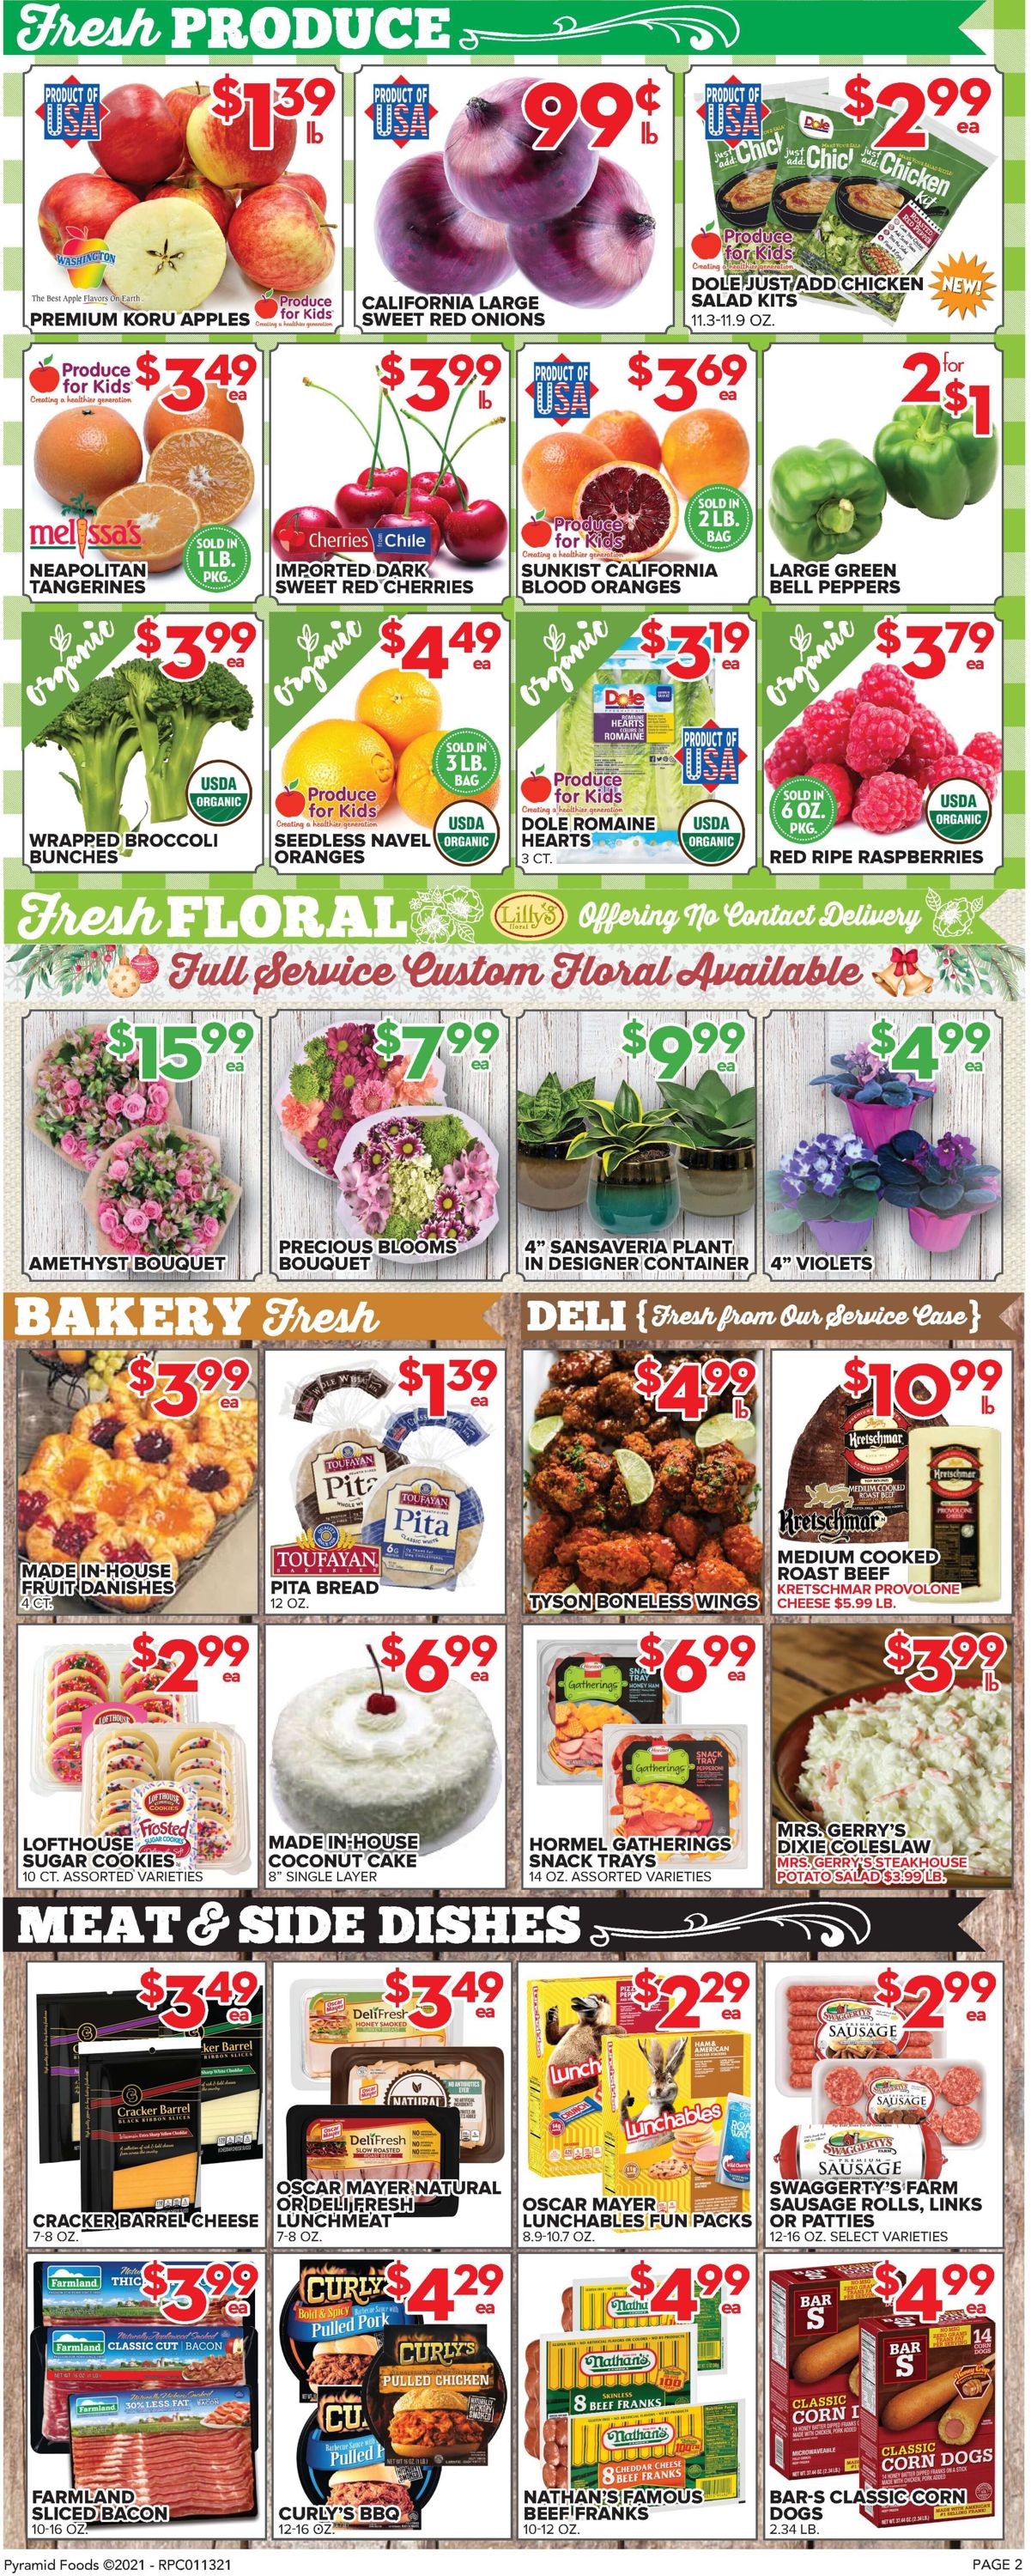 Price Cutter Weekly Ad Circular - valid 01/13-01/19/2021 (Page 2)